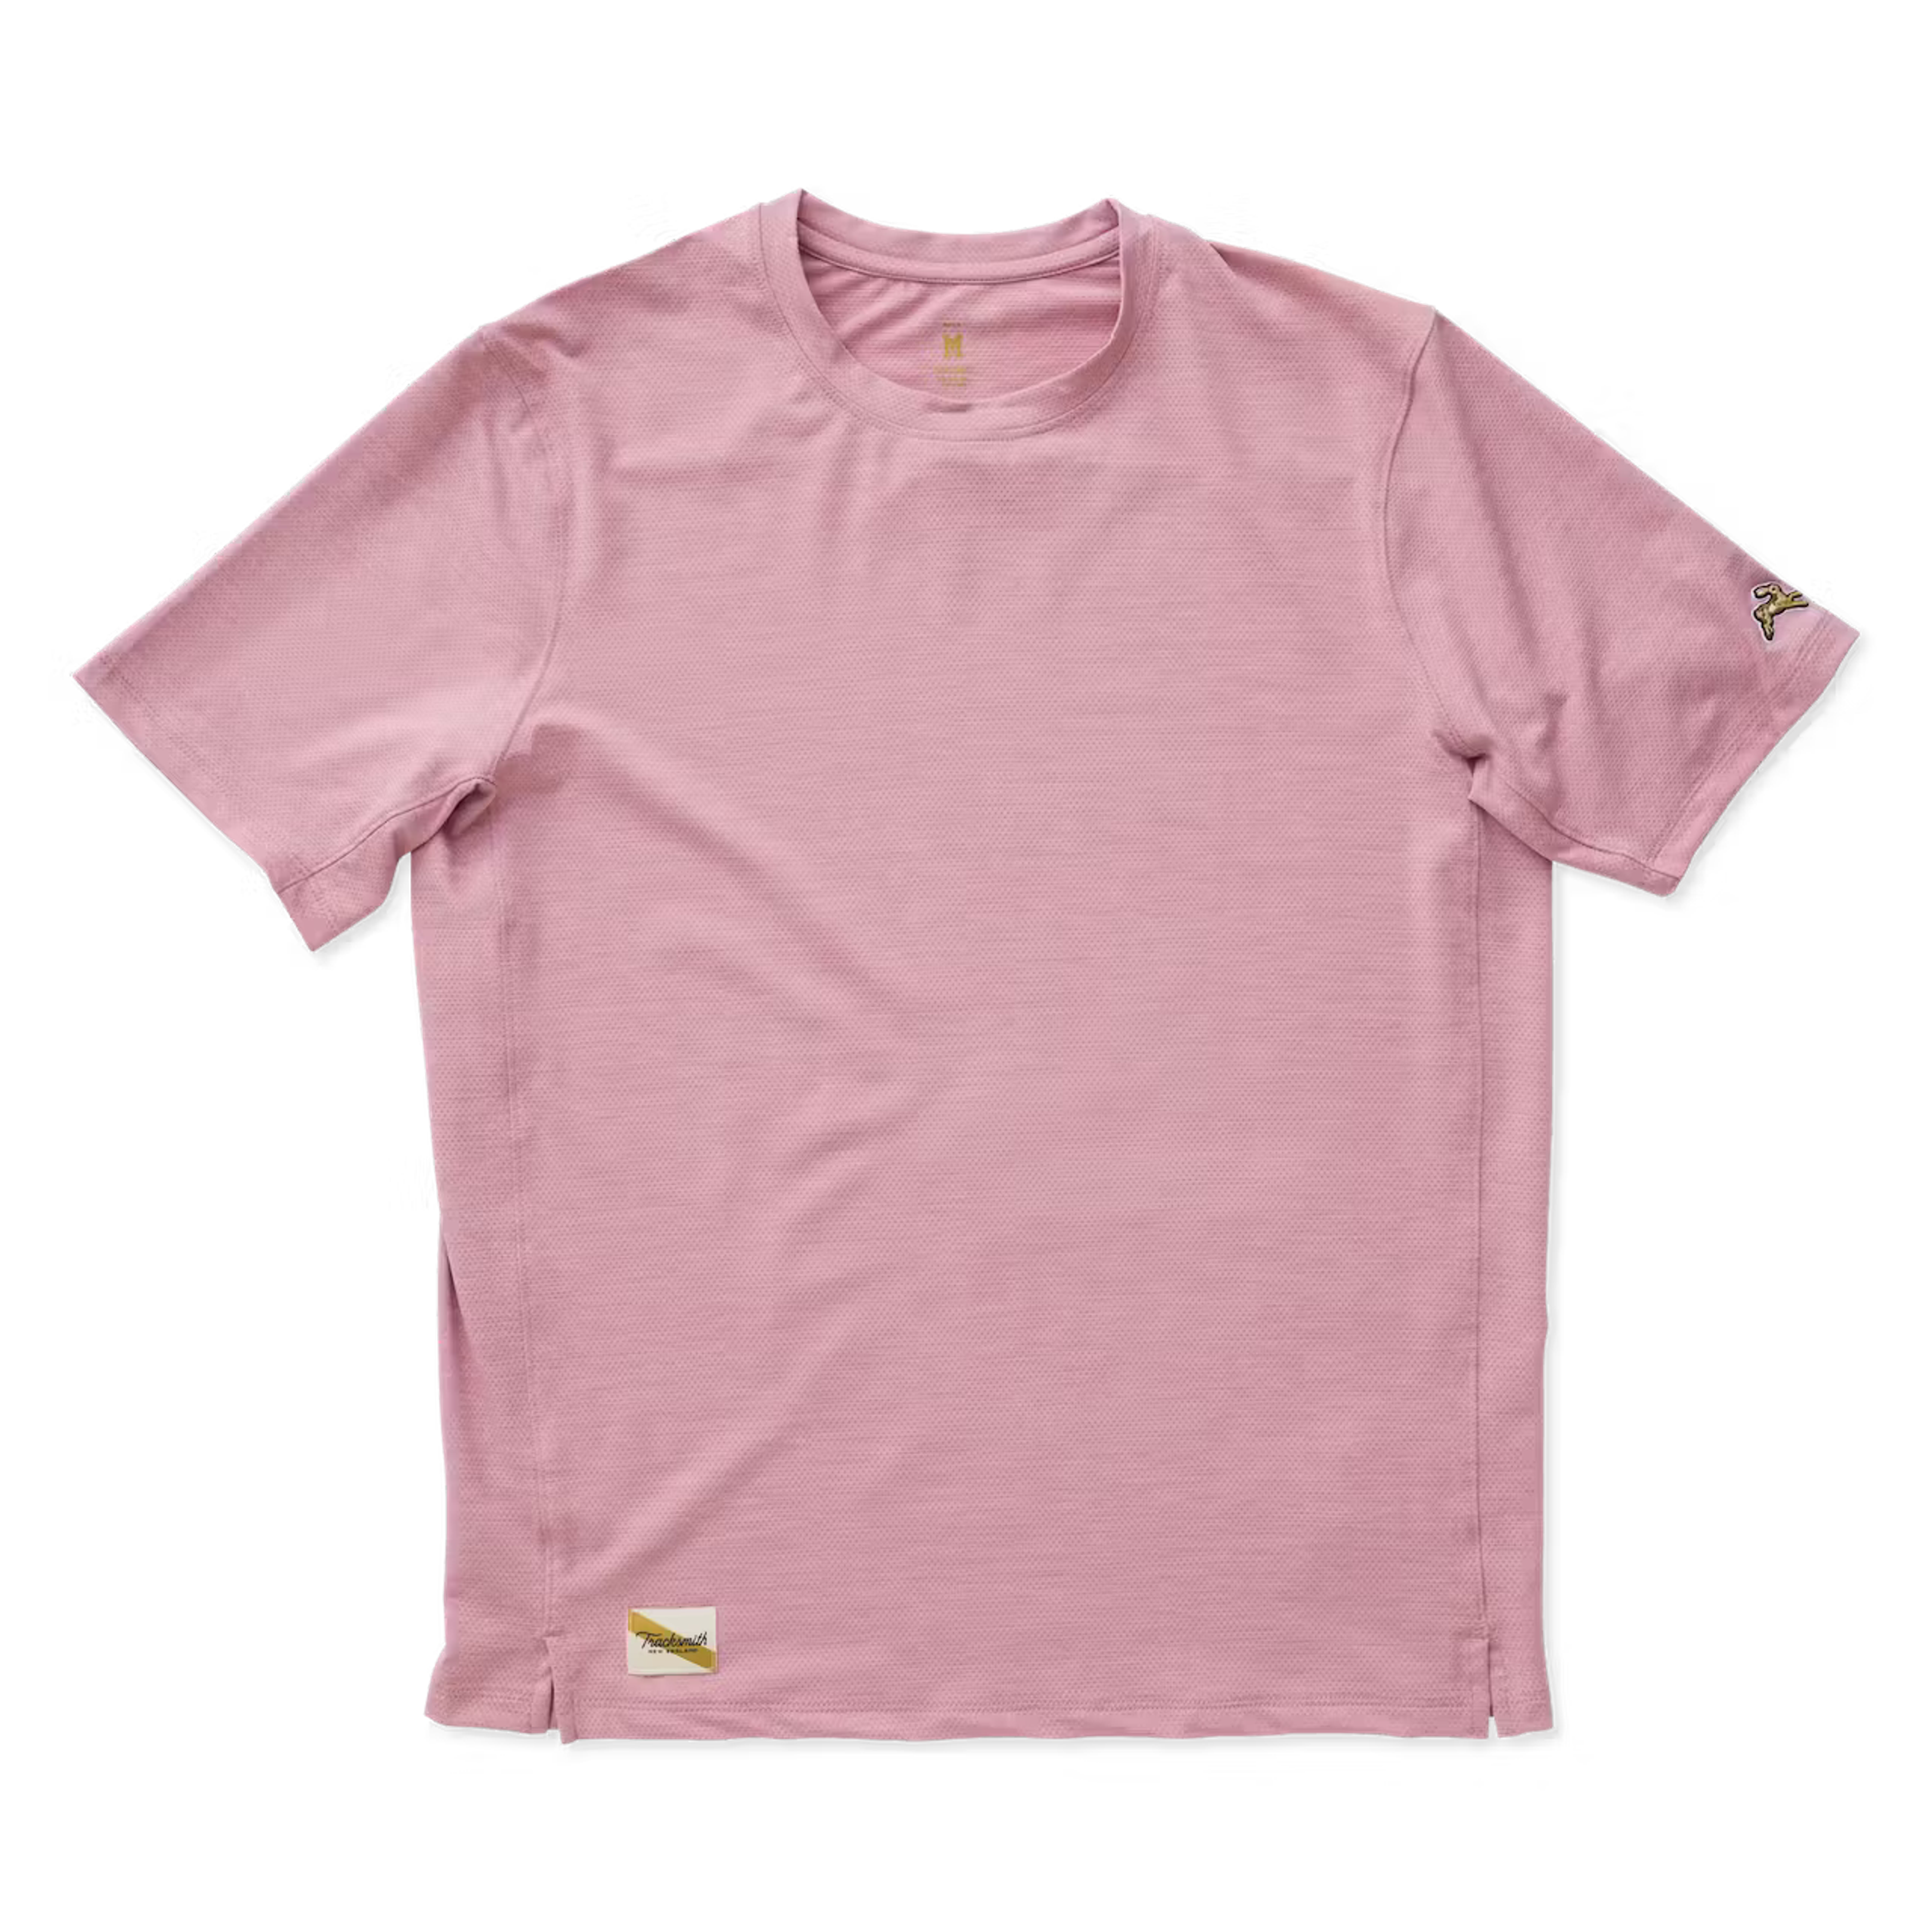 Session Tee - Large / Rose